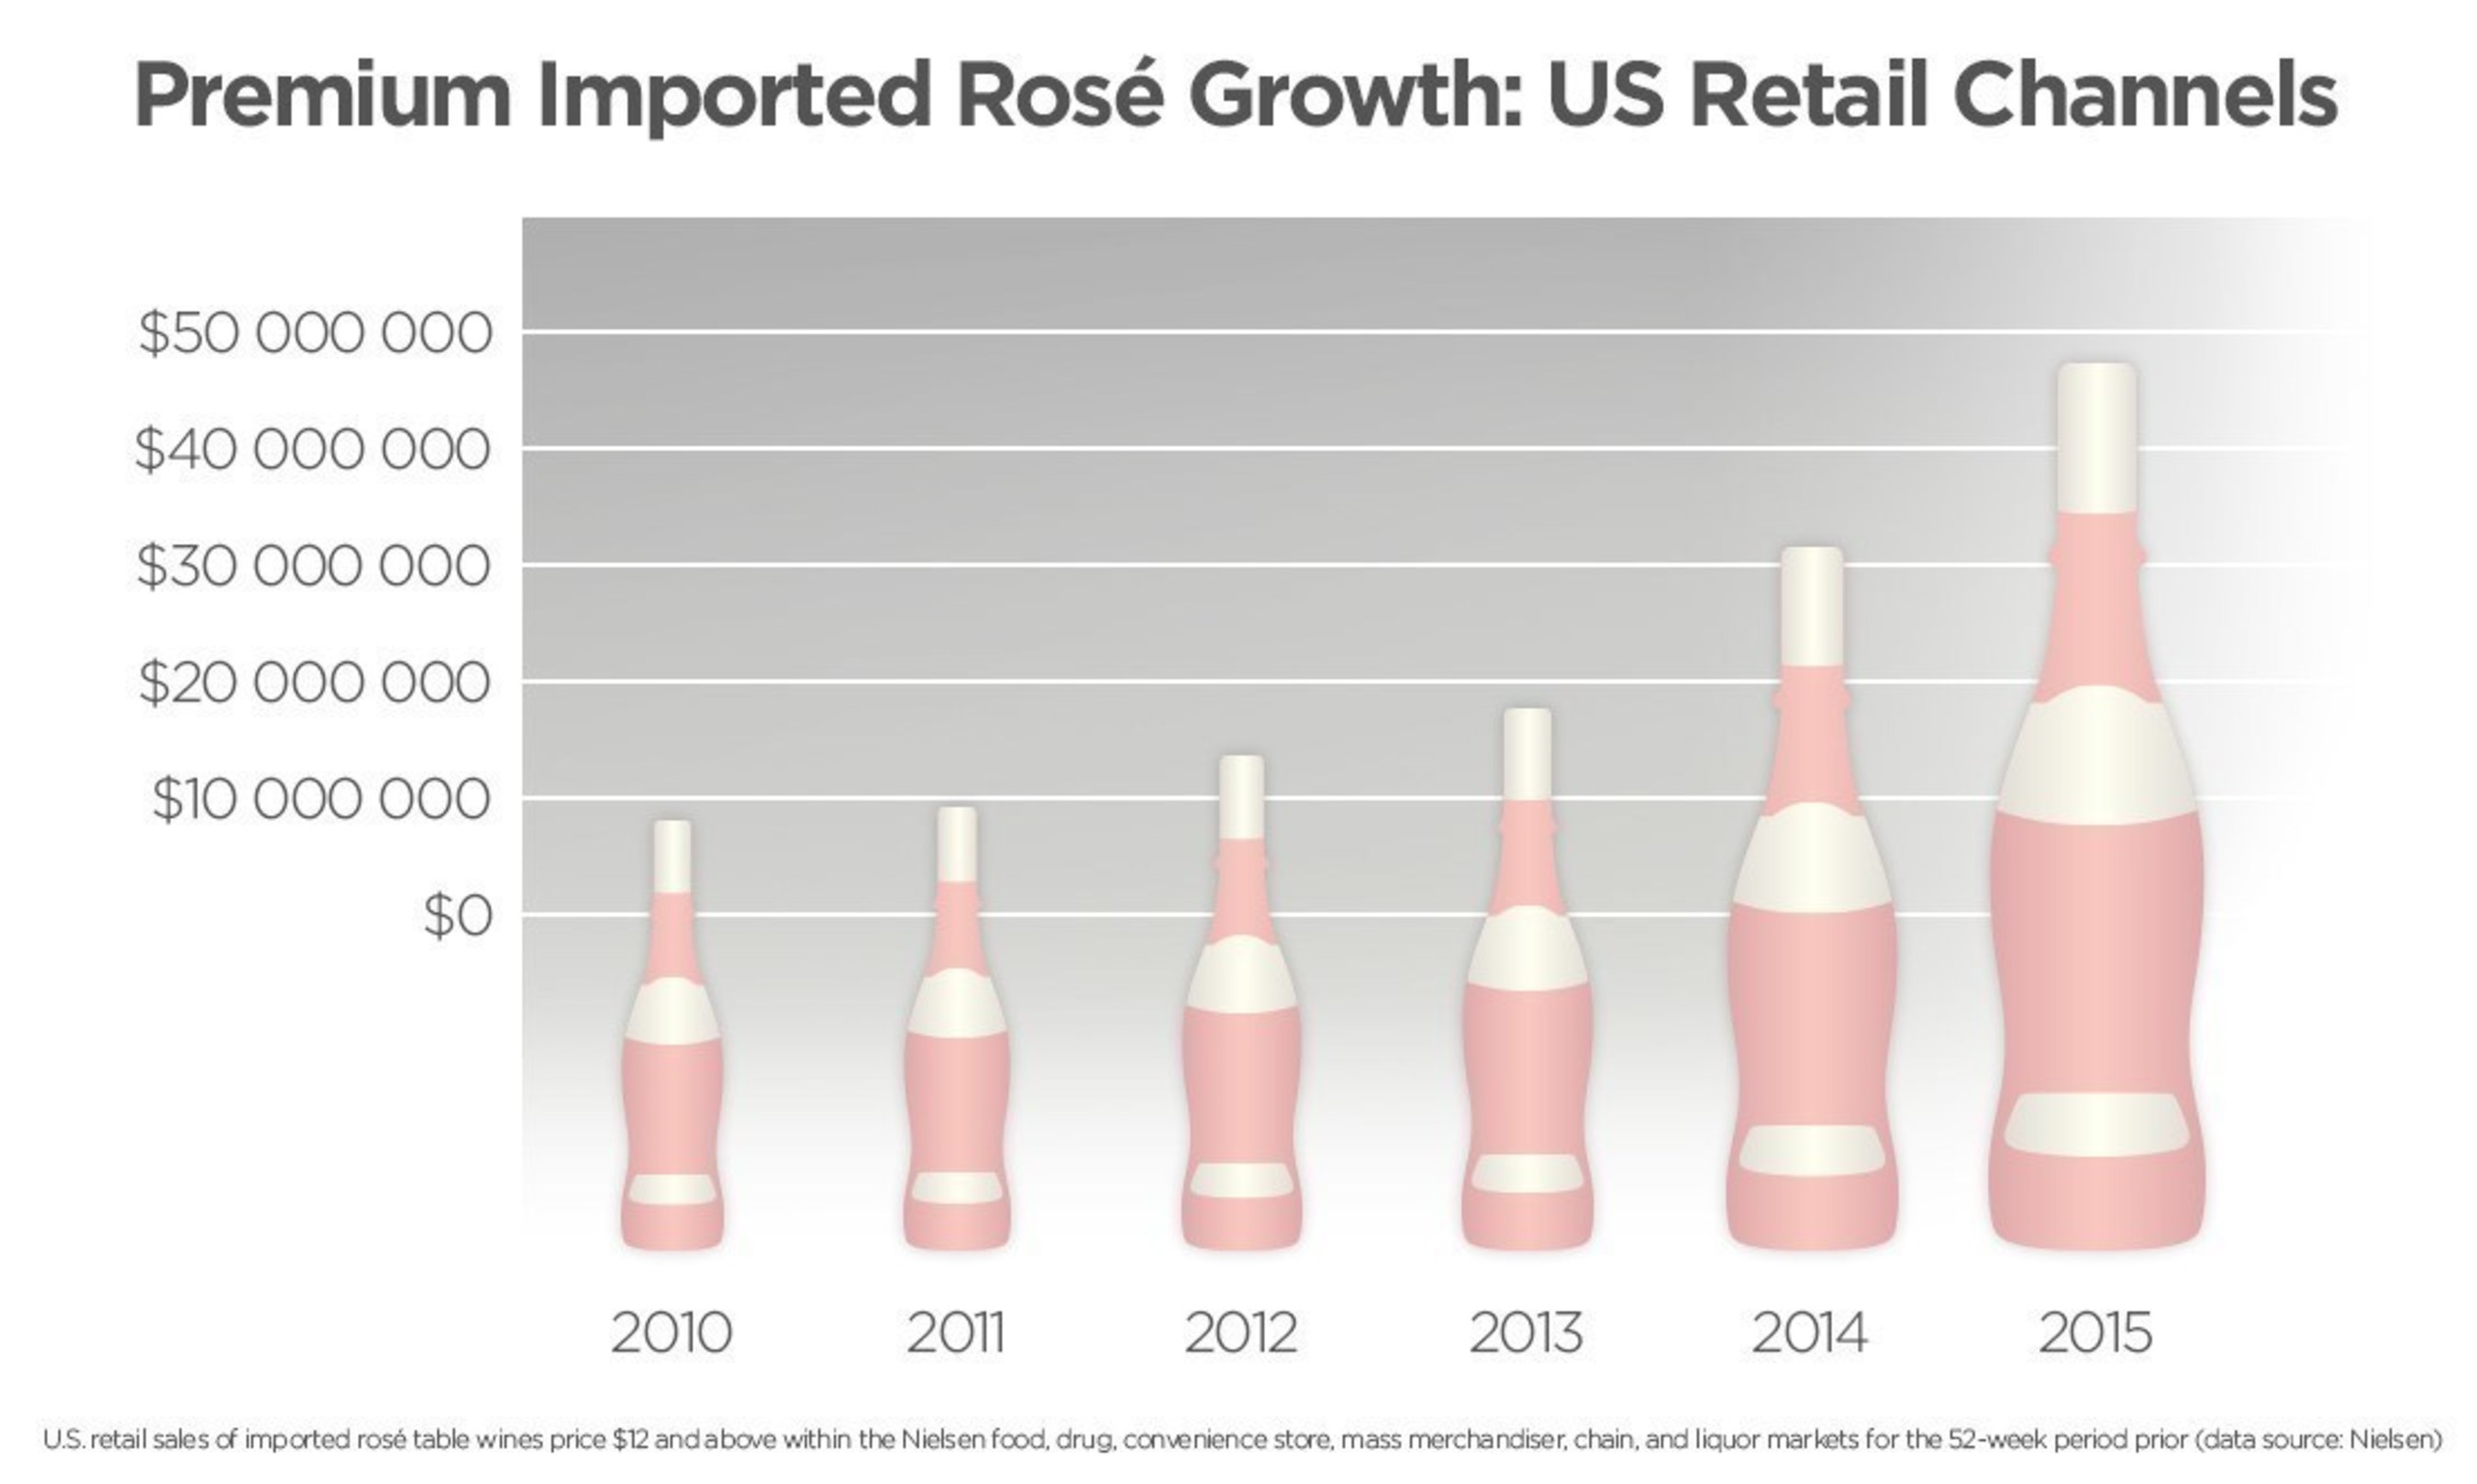 Premium Imported Rose Growth: US Retail Channels. Source: Nielsen.